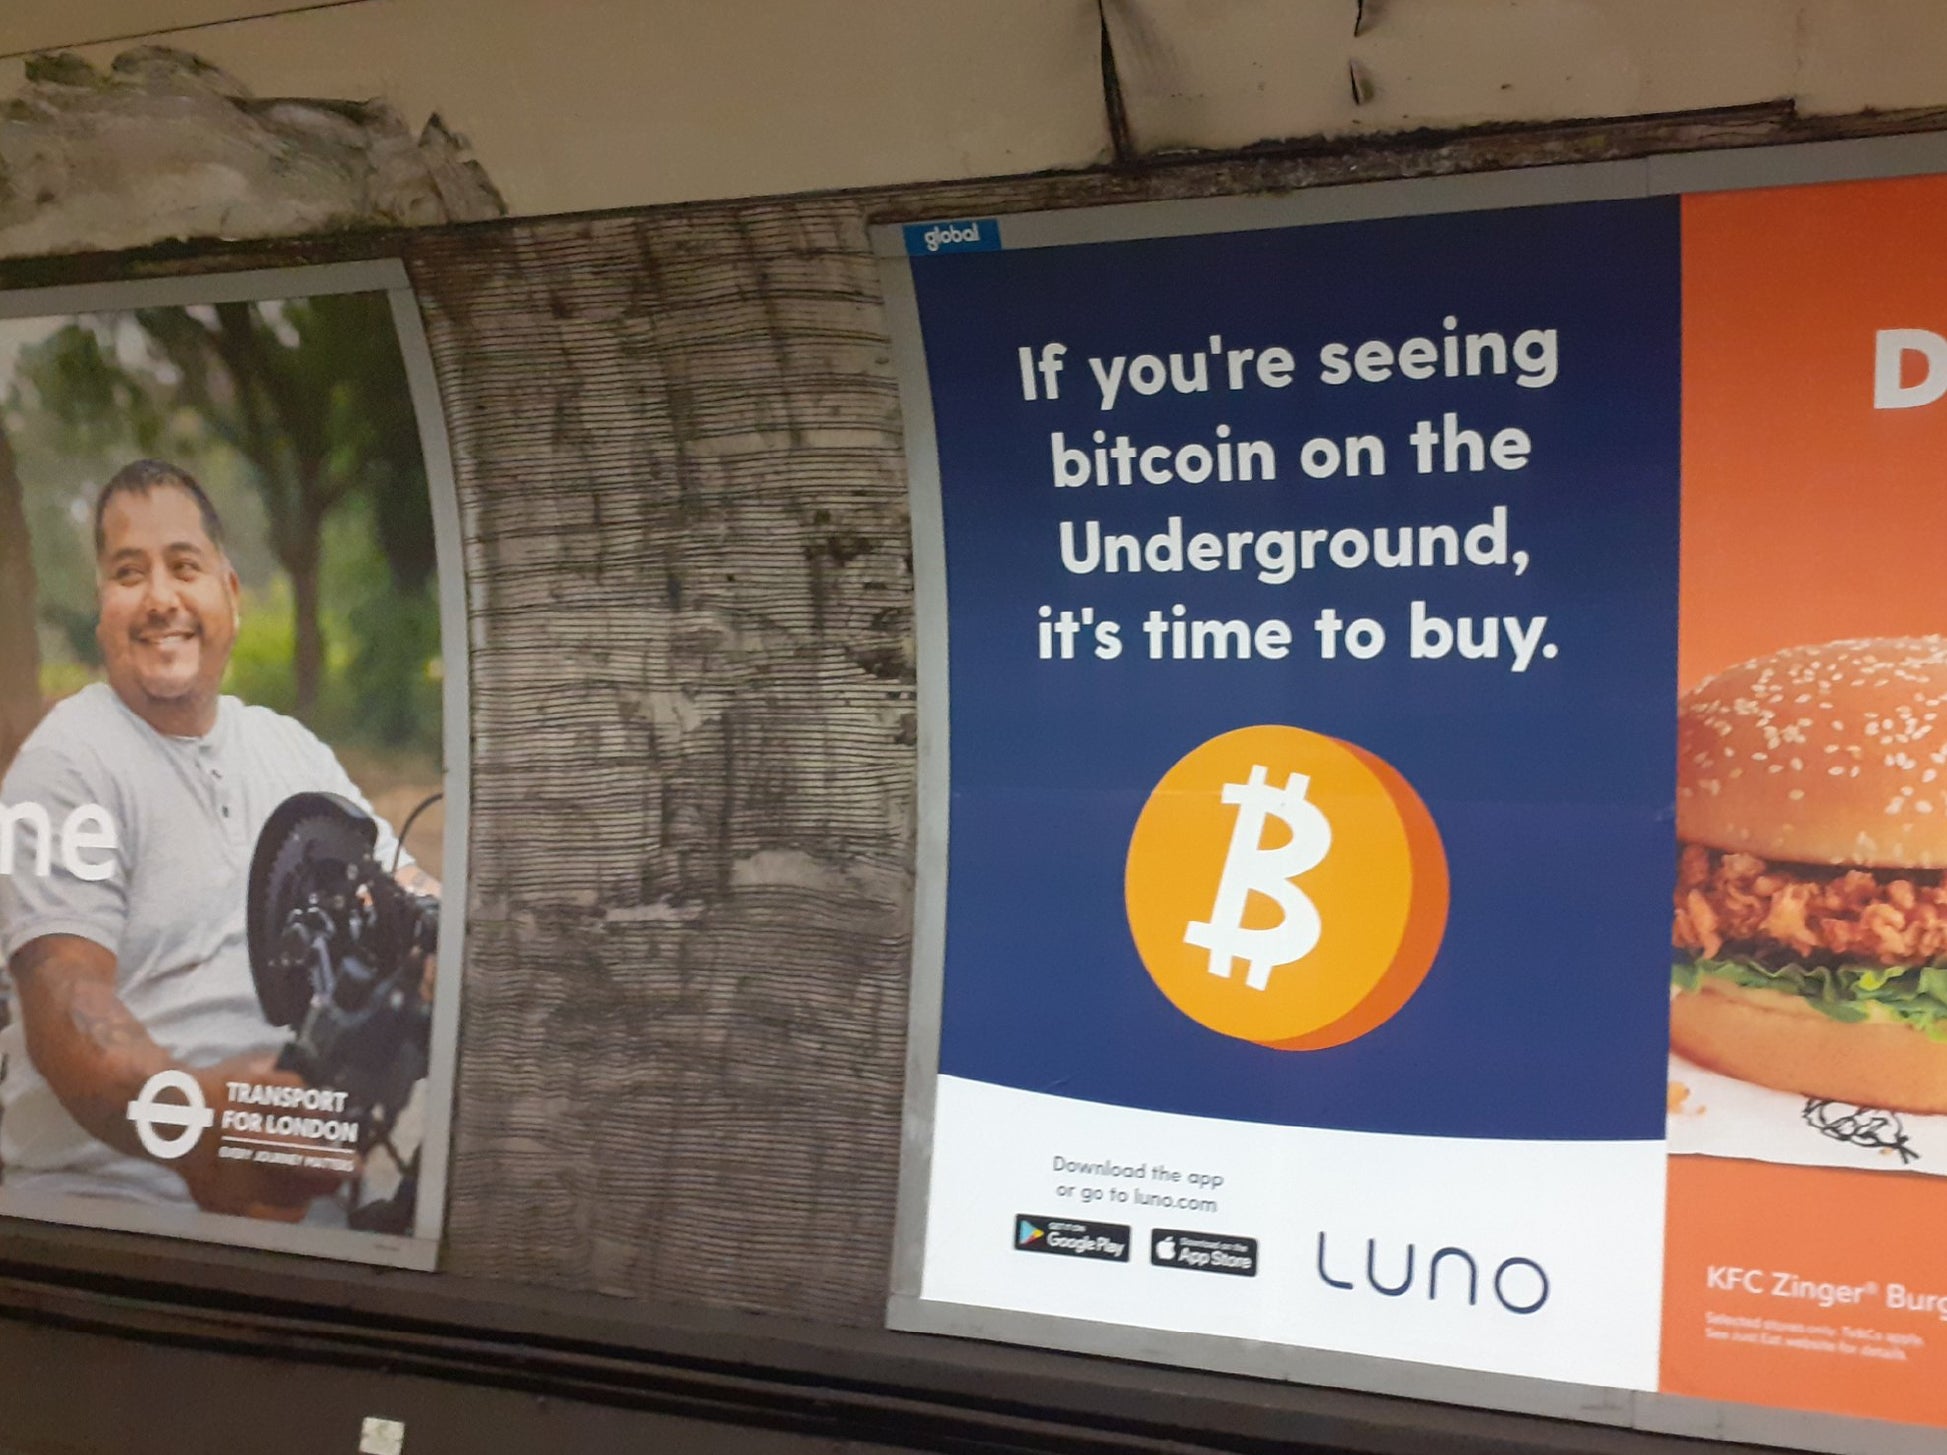 The Luno ad banned by the ASA